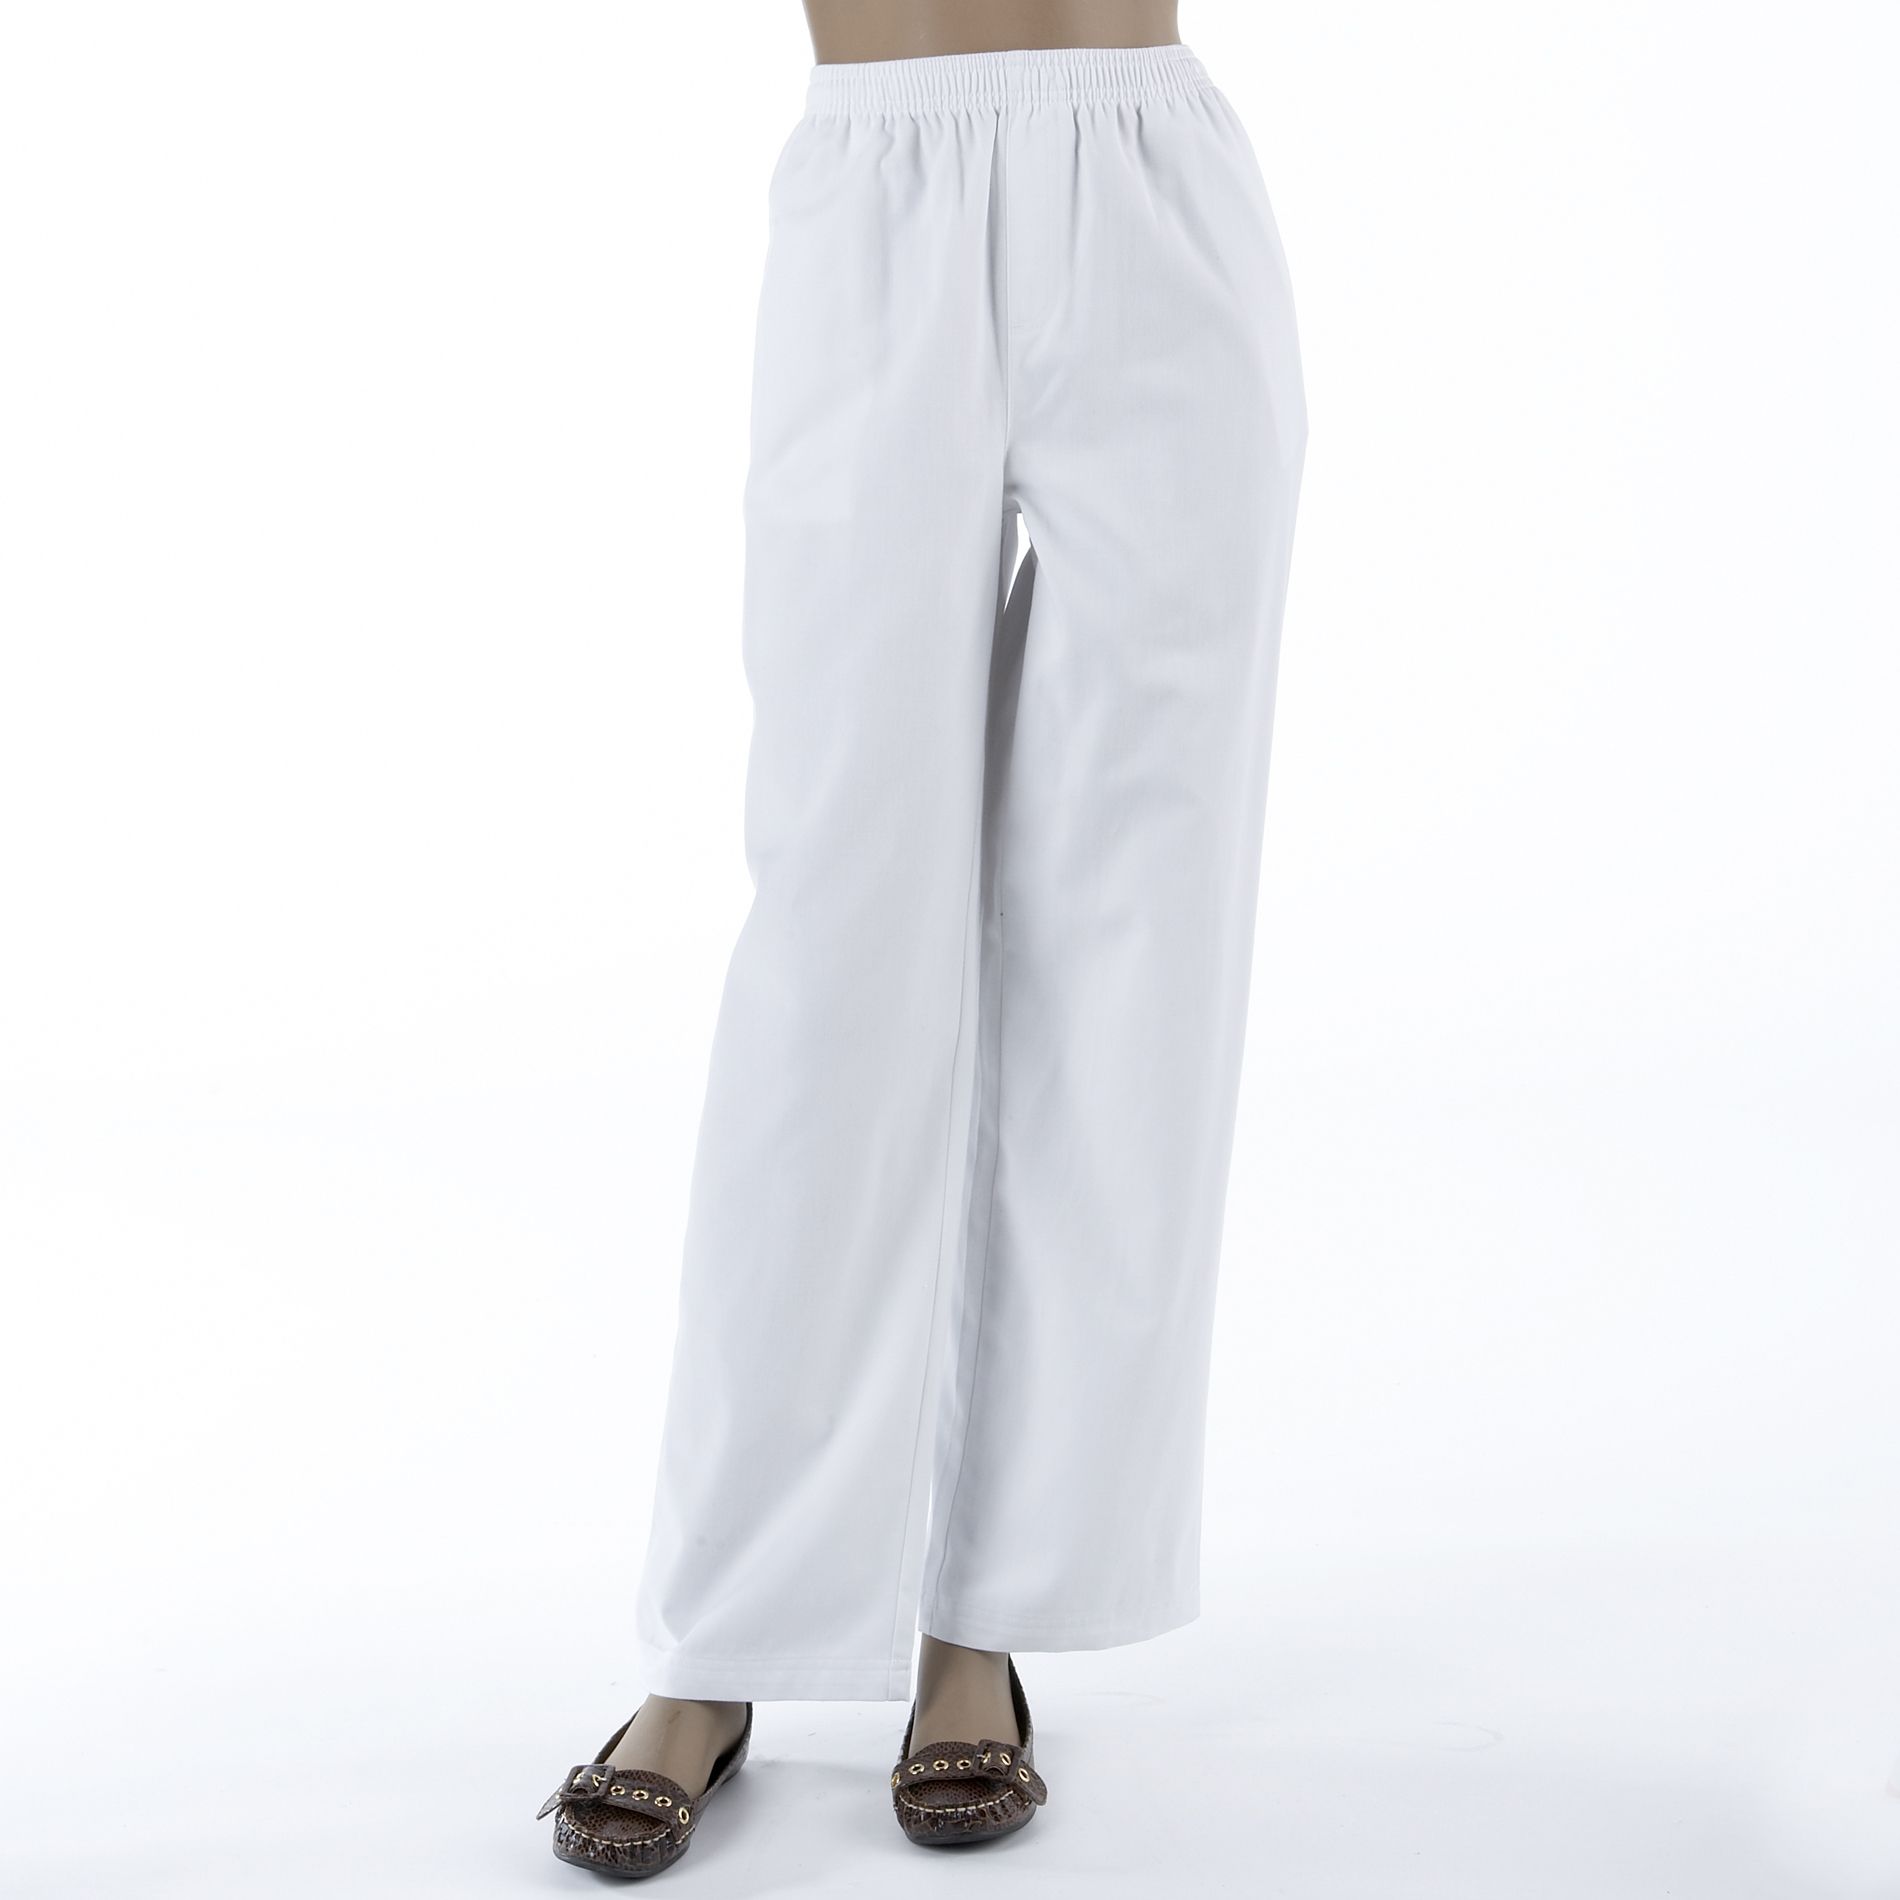 Basic Editions Women's Petite Twill Pull-on 100% Cotton Pant